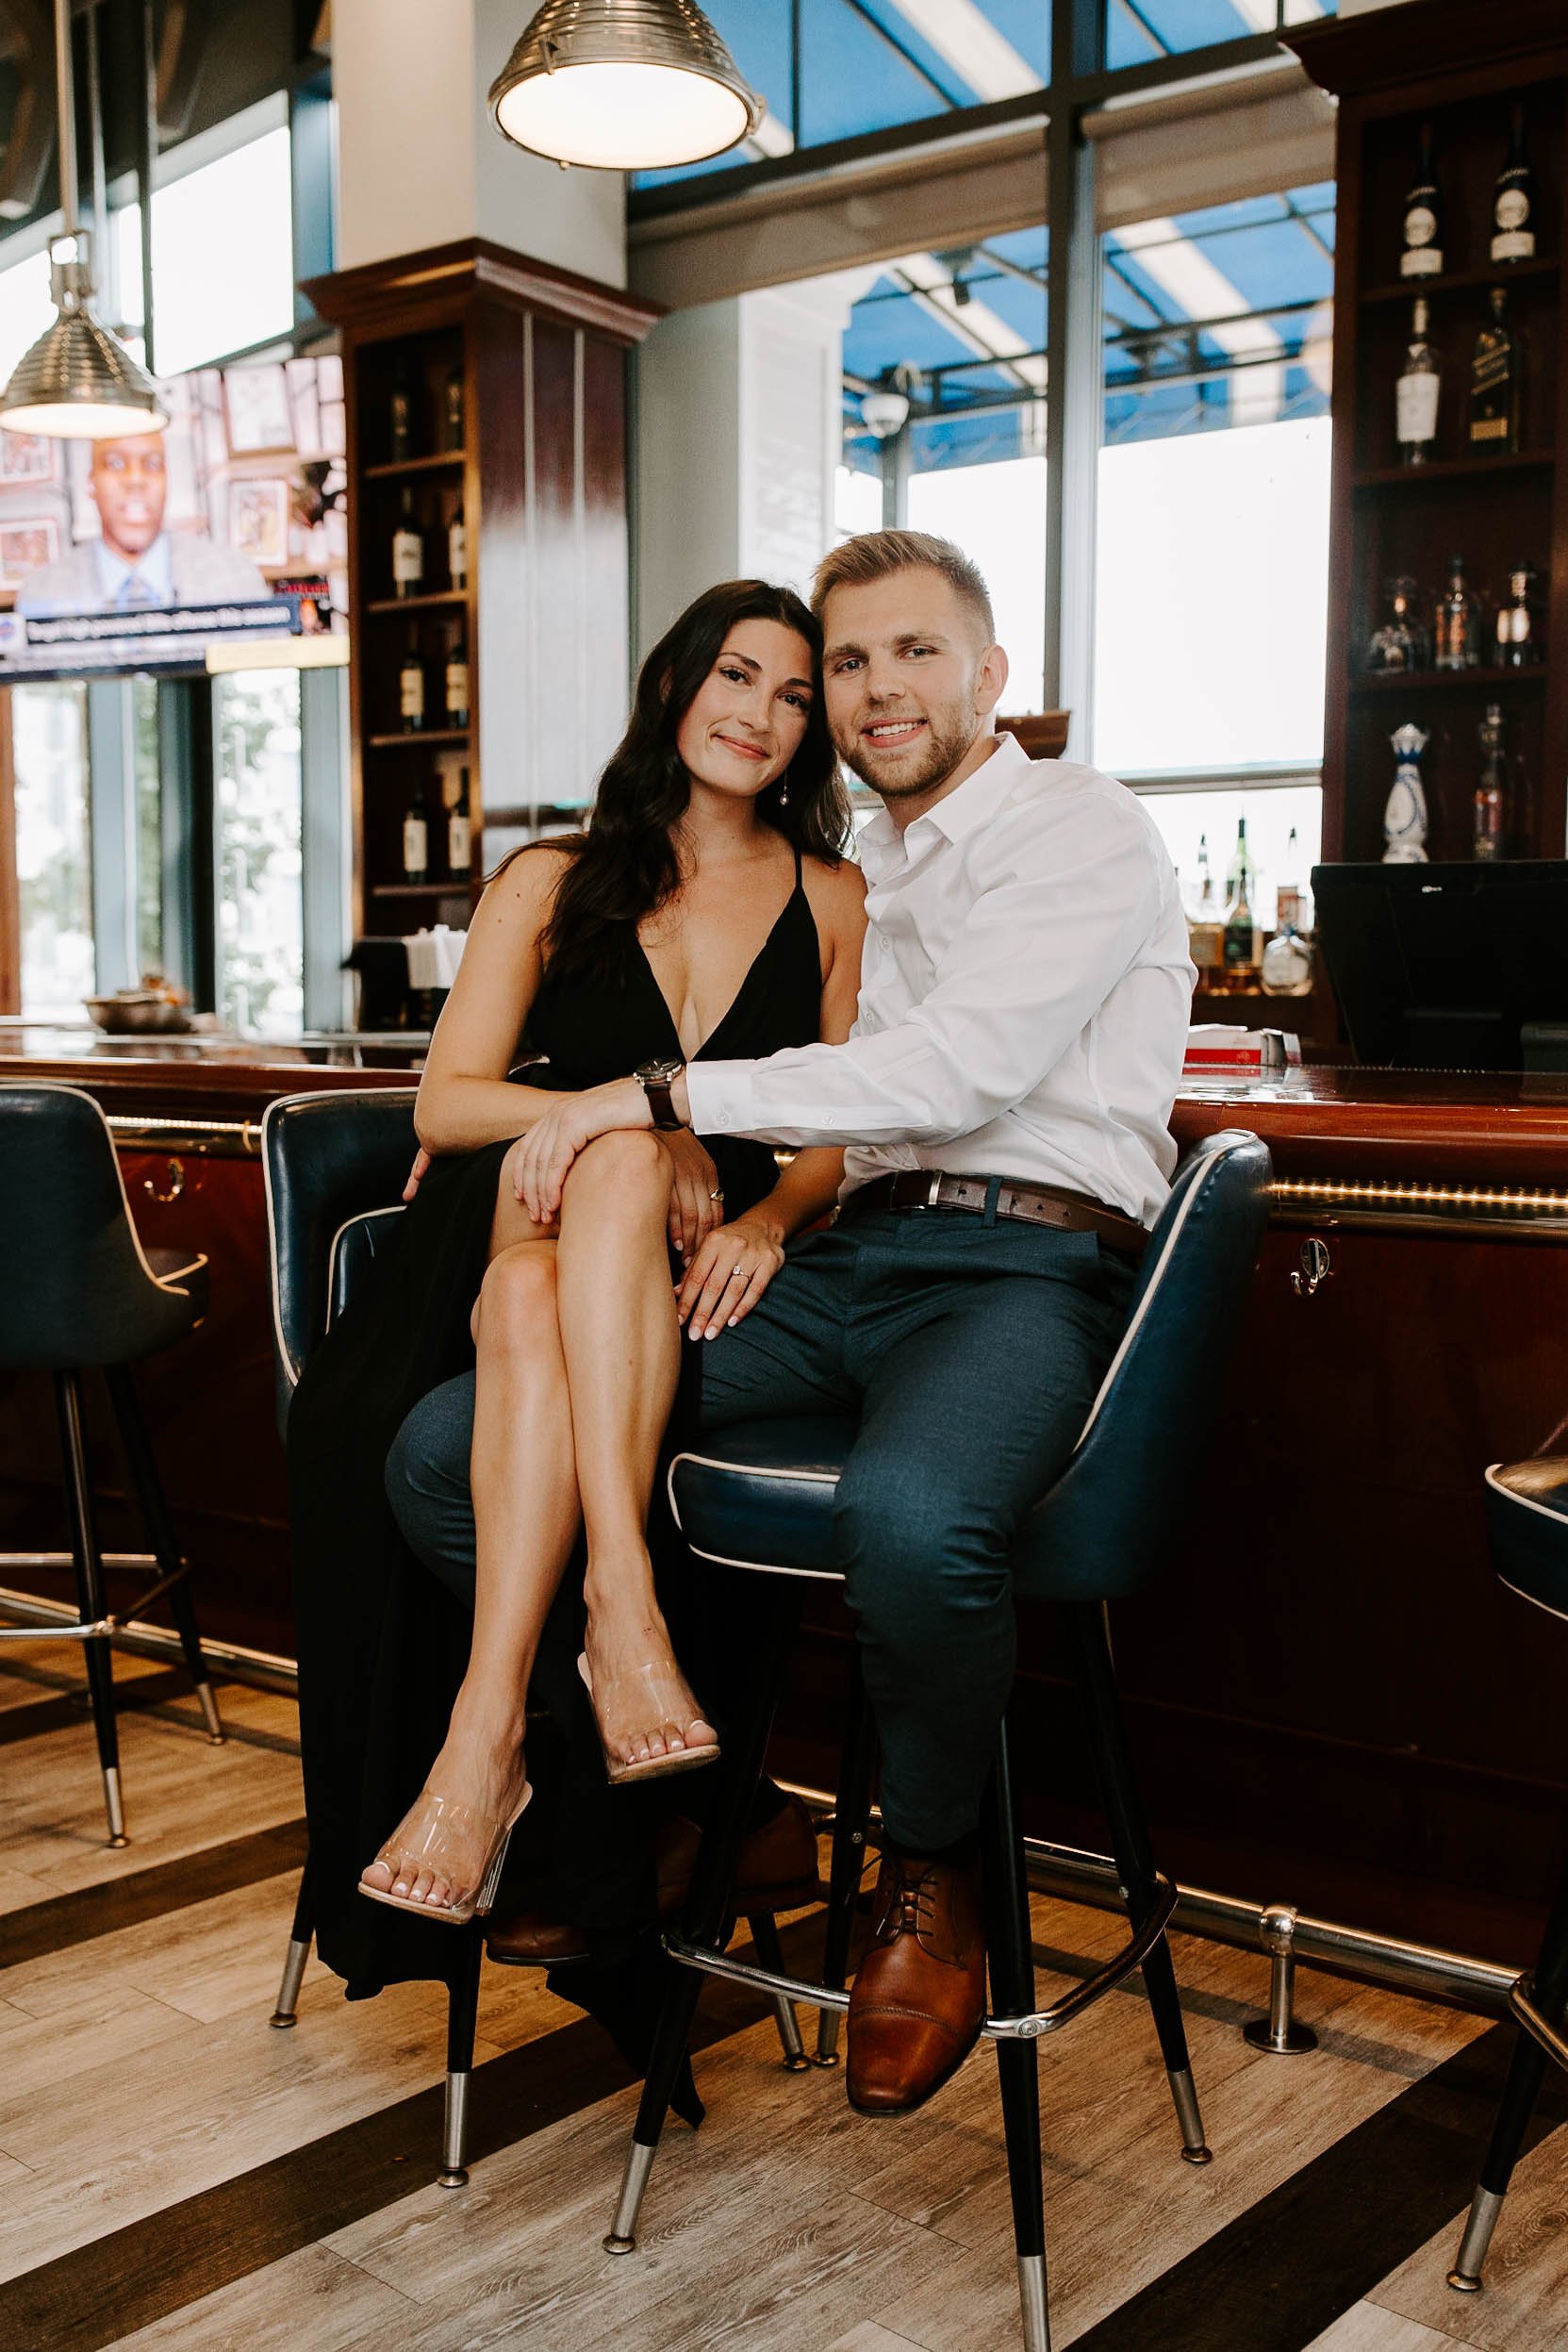  Engaged couple smiling sitting at a restaurant bar, girlfriend wearing a black dress and boyfriend is wearing a white button down and jeans  